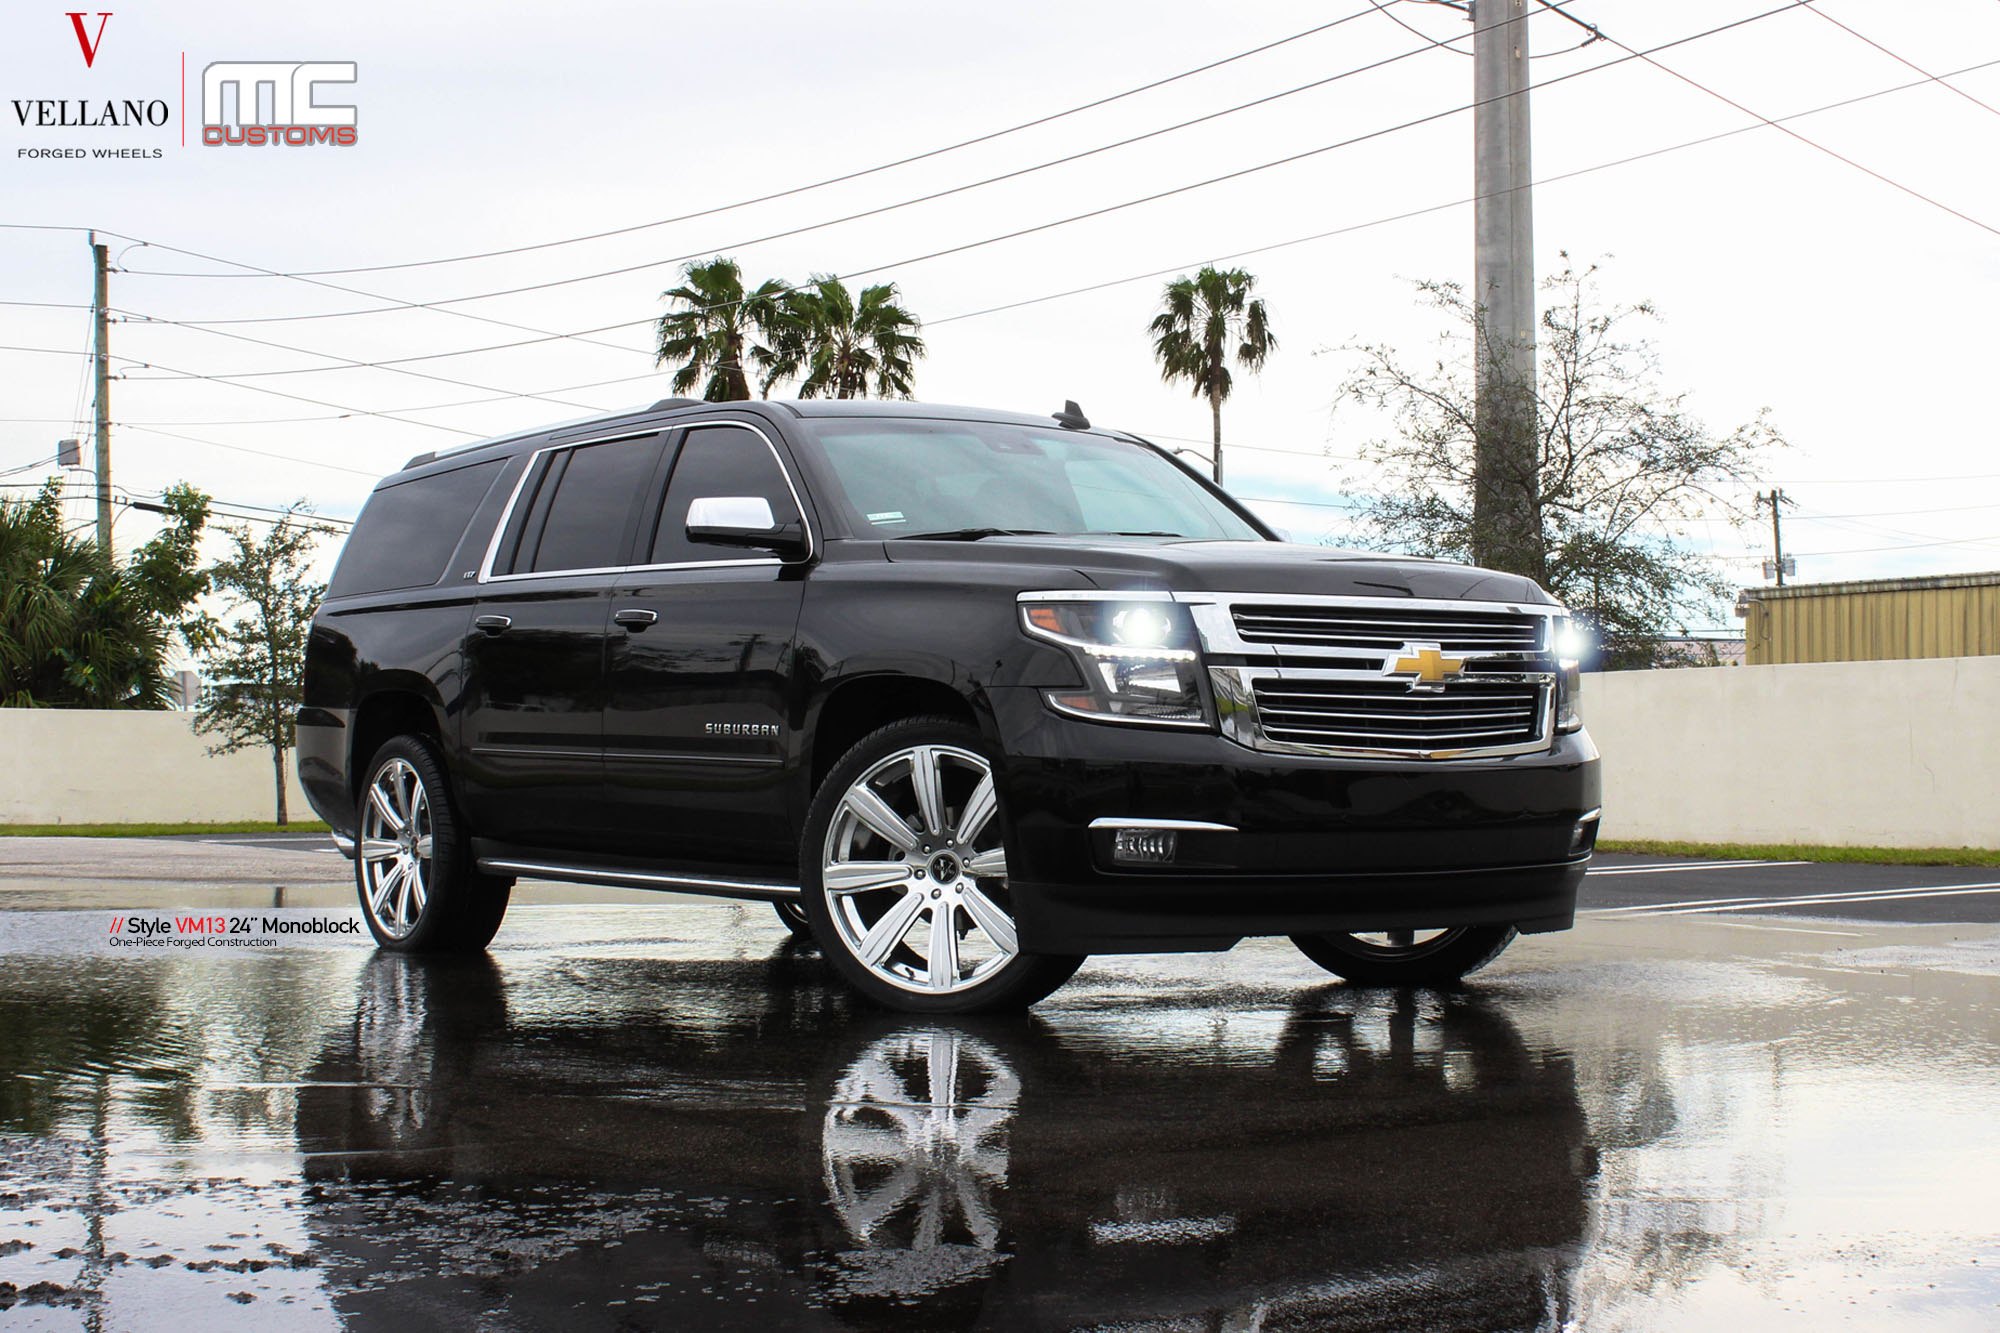 Chrome Billet Grille on Black Chevy Tahoe - Photo by Vellano